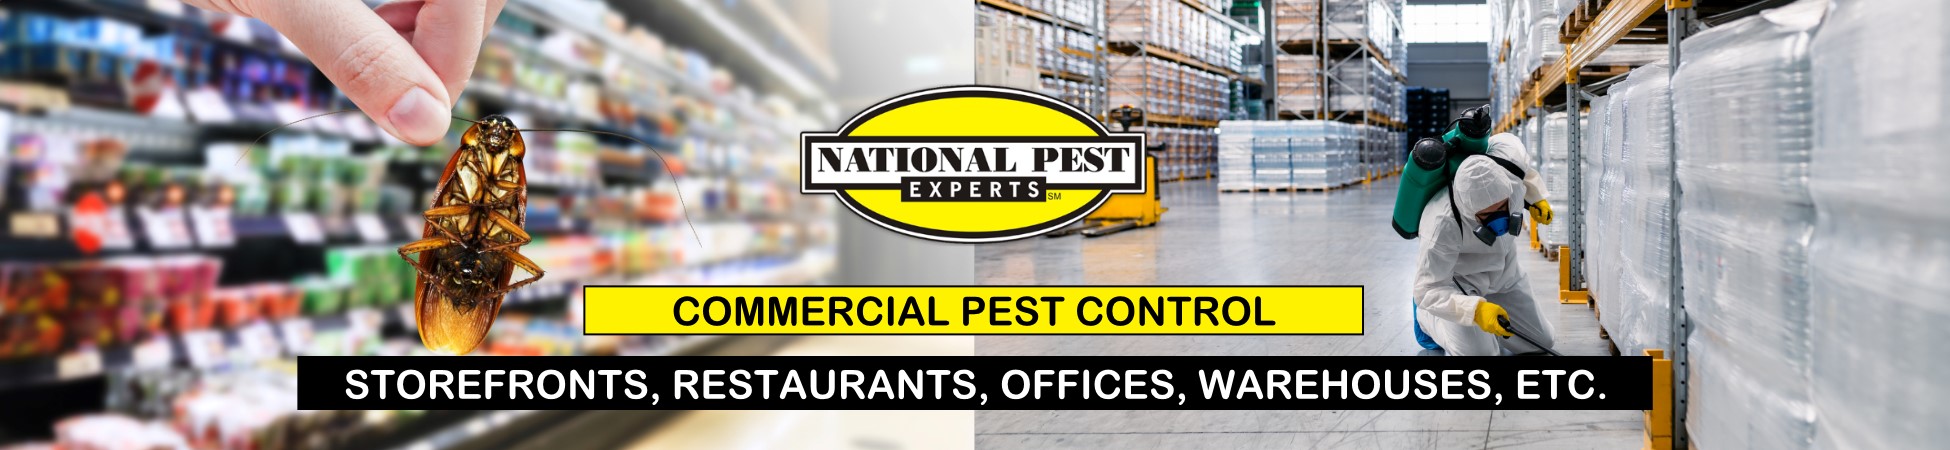 National Pest Experts - Commercial & Industrial exterminating and pest control in Massapequa, NY